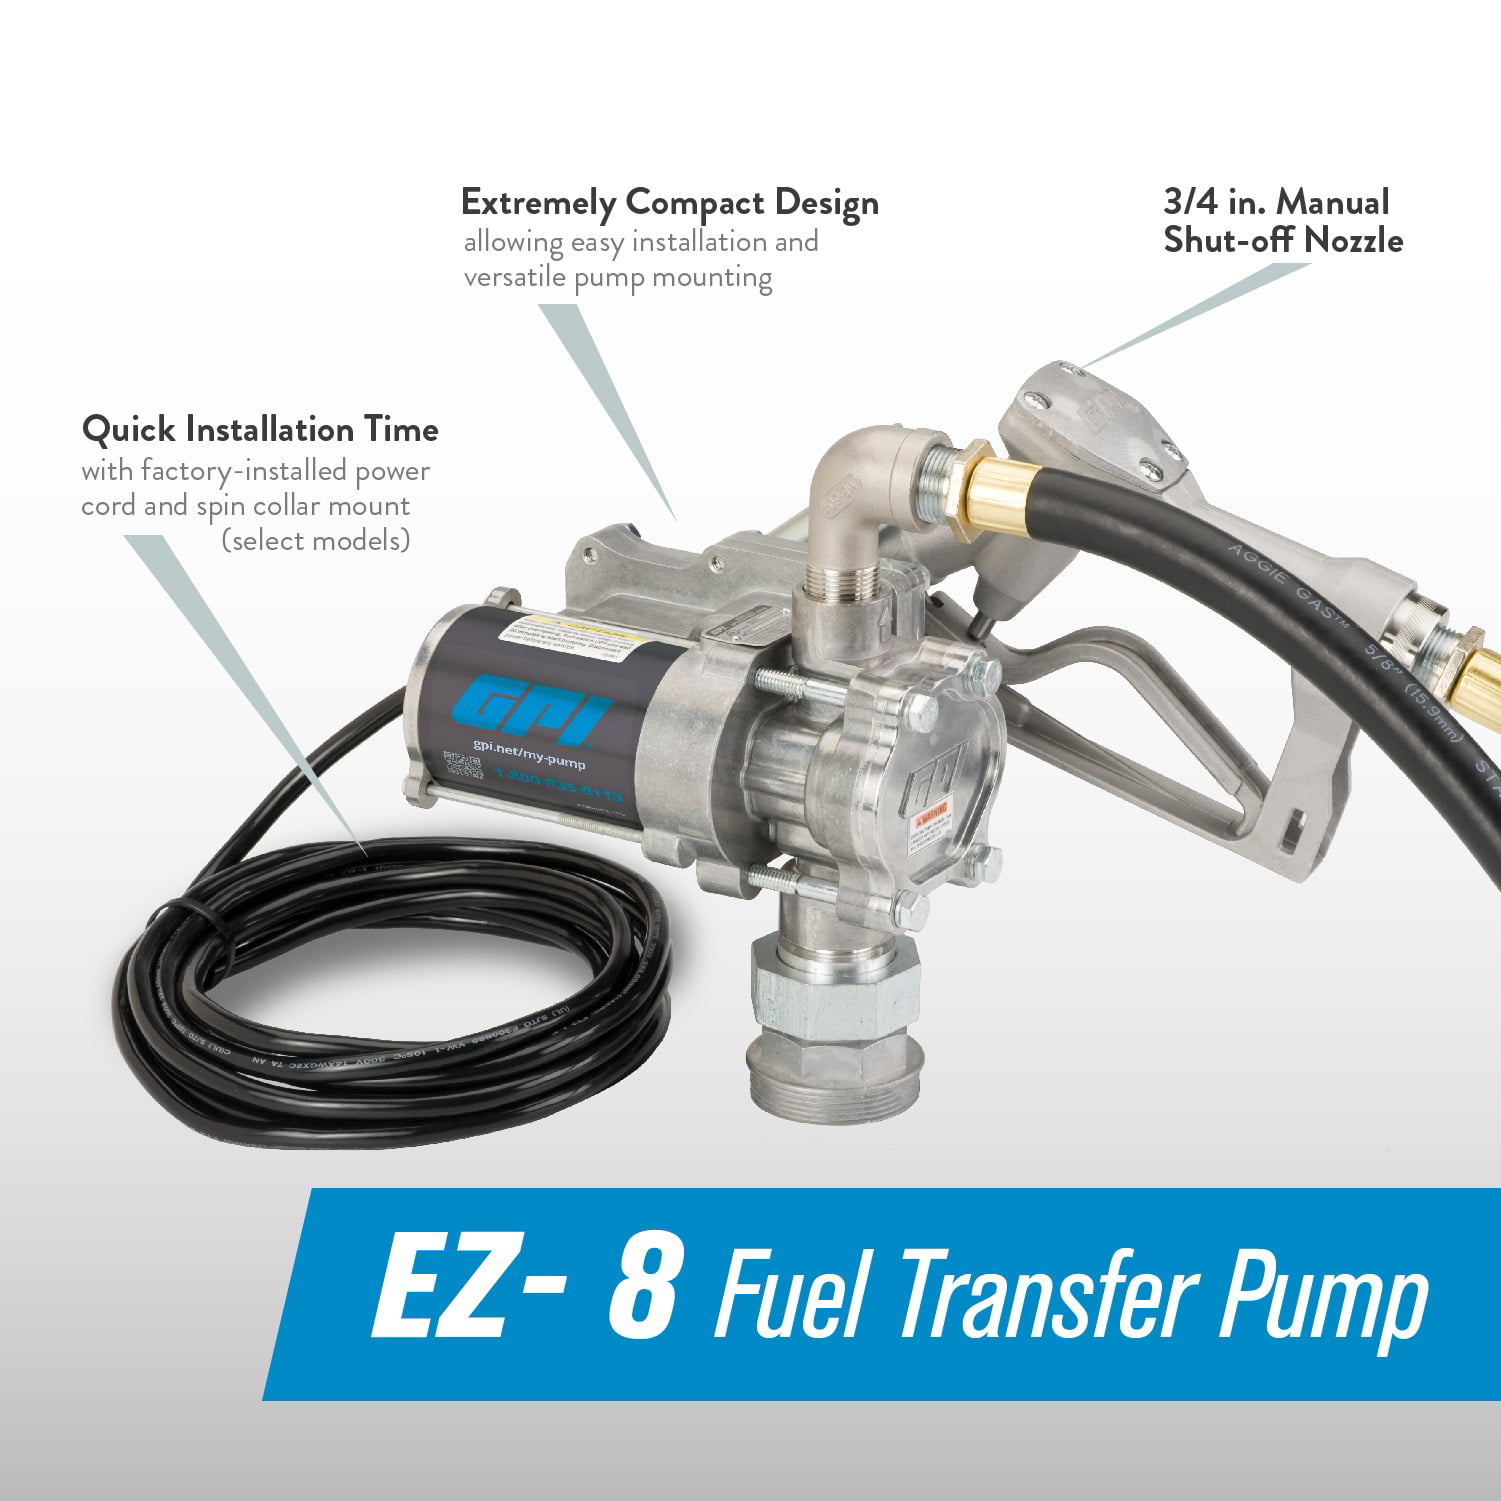 GPI - EZ-8 12v Fuel Transfer Pump (137100-05), Manual Shut-off Nozzle, 10'  Hose, Power Cord, Adjustable Suction Pipe, Spin Collar